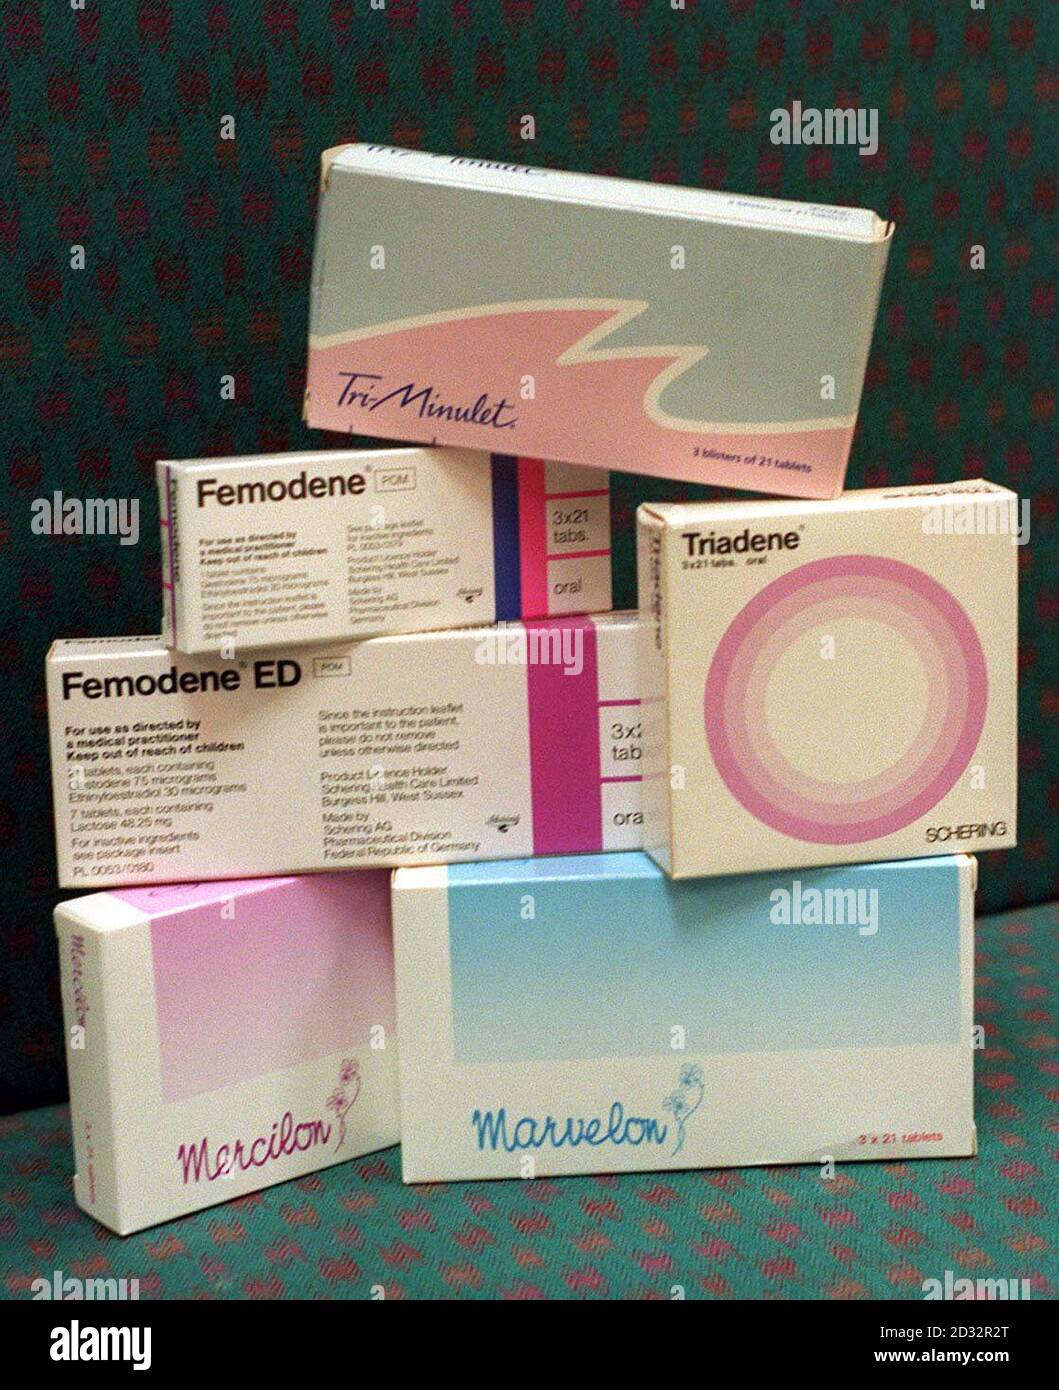 DECEMBER 4th : On this day in 1961 Birth Control Pills became availiable on the NHS. A selection of some of the brands of oral contraceptive pills that were named in a Government health report as possibly being linked to an increased risk of thrombosis in women. The brands featured are: (clockwise from top) TriMinulet, Triadene, Marvelon, Mercilion Femodene ED and Femodene. Stock Photo